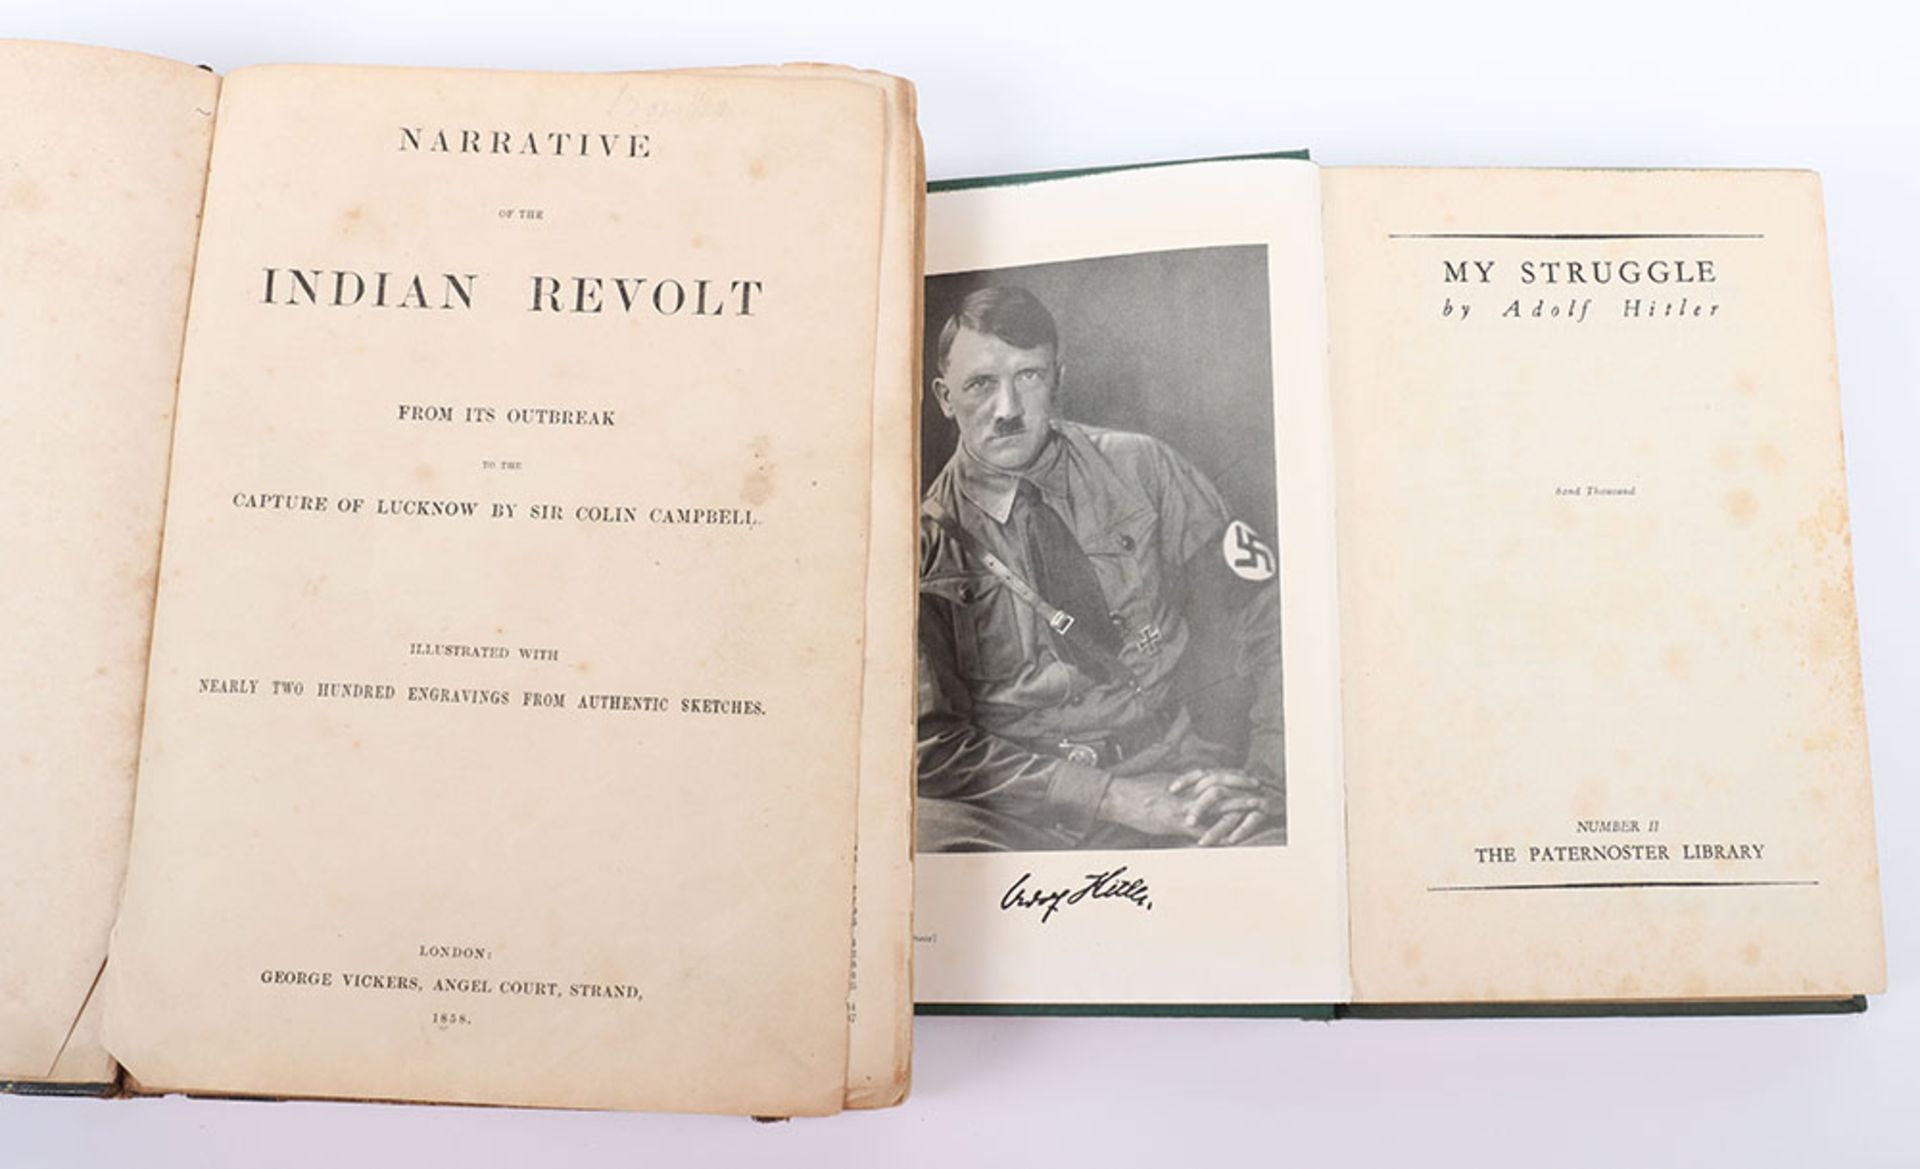 My Struggle Adolf Hitler book, by Paternoster Library - Image 2 of 2